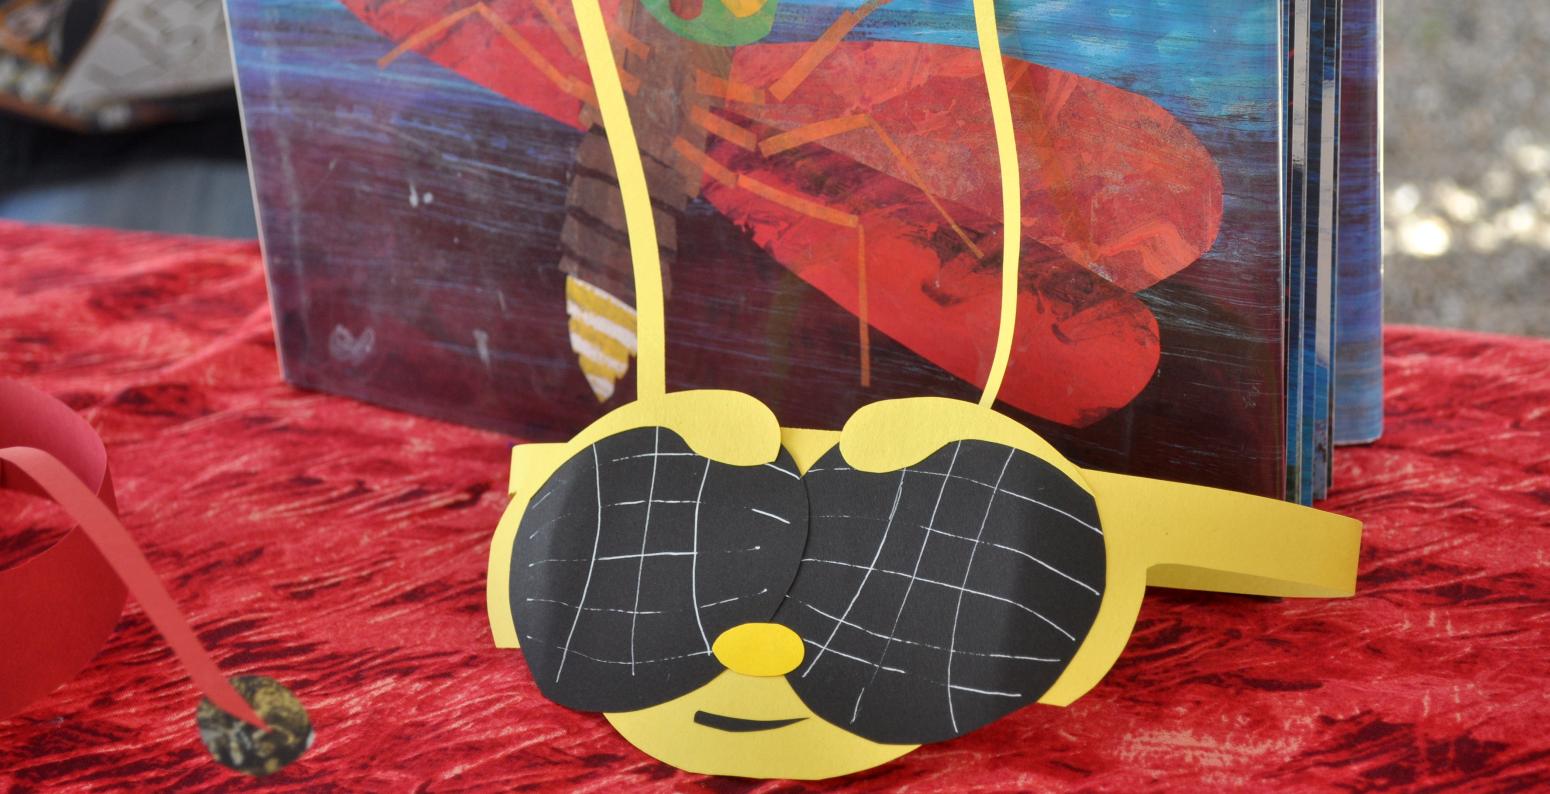 A paper hat that looks like the face of a bee in front of the picture book "The Very Lonely Firefly."